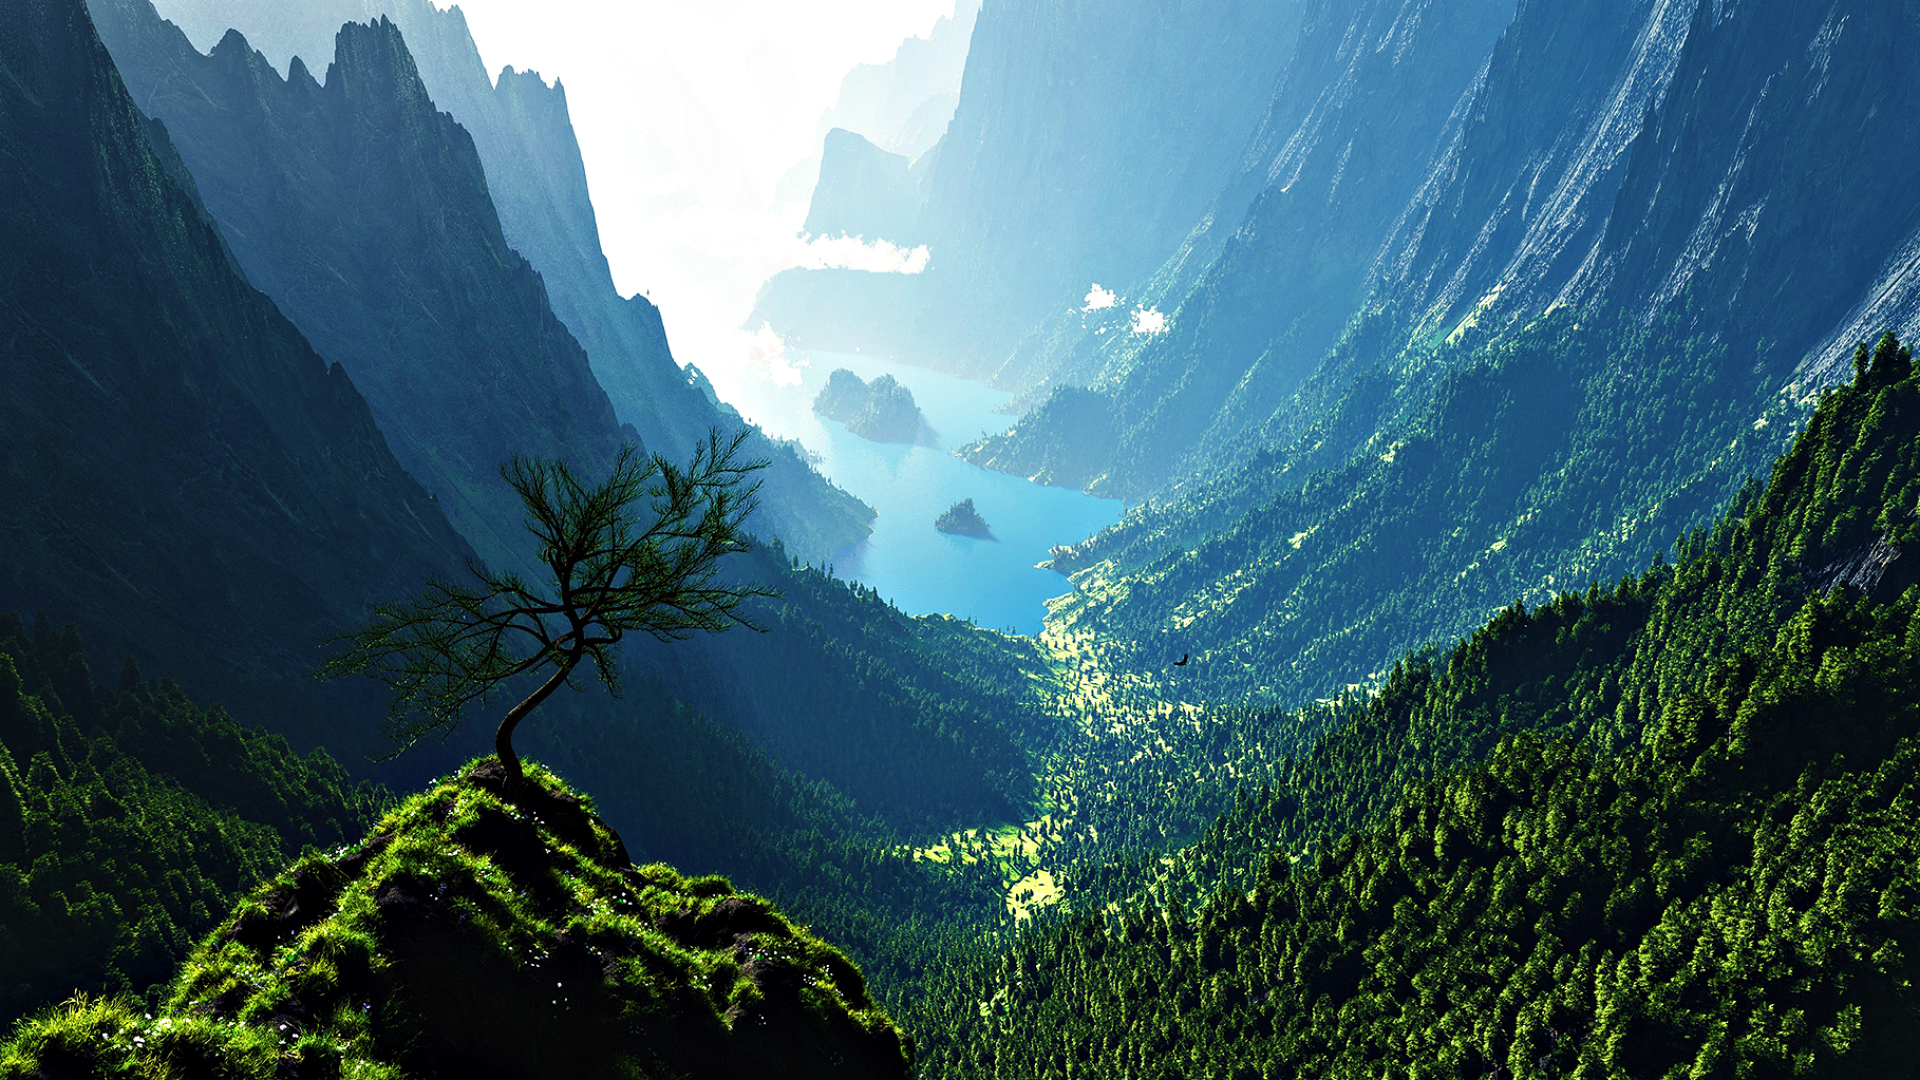 Mountain Valley Backgrounds wallpaper | 1920x1080 | #27275